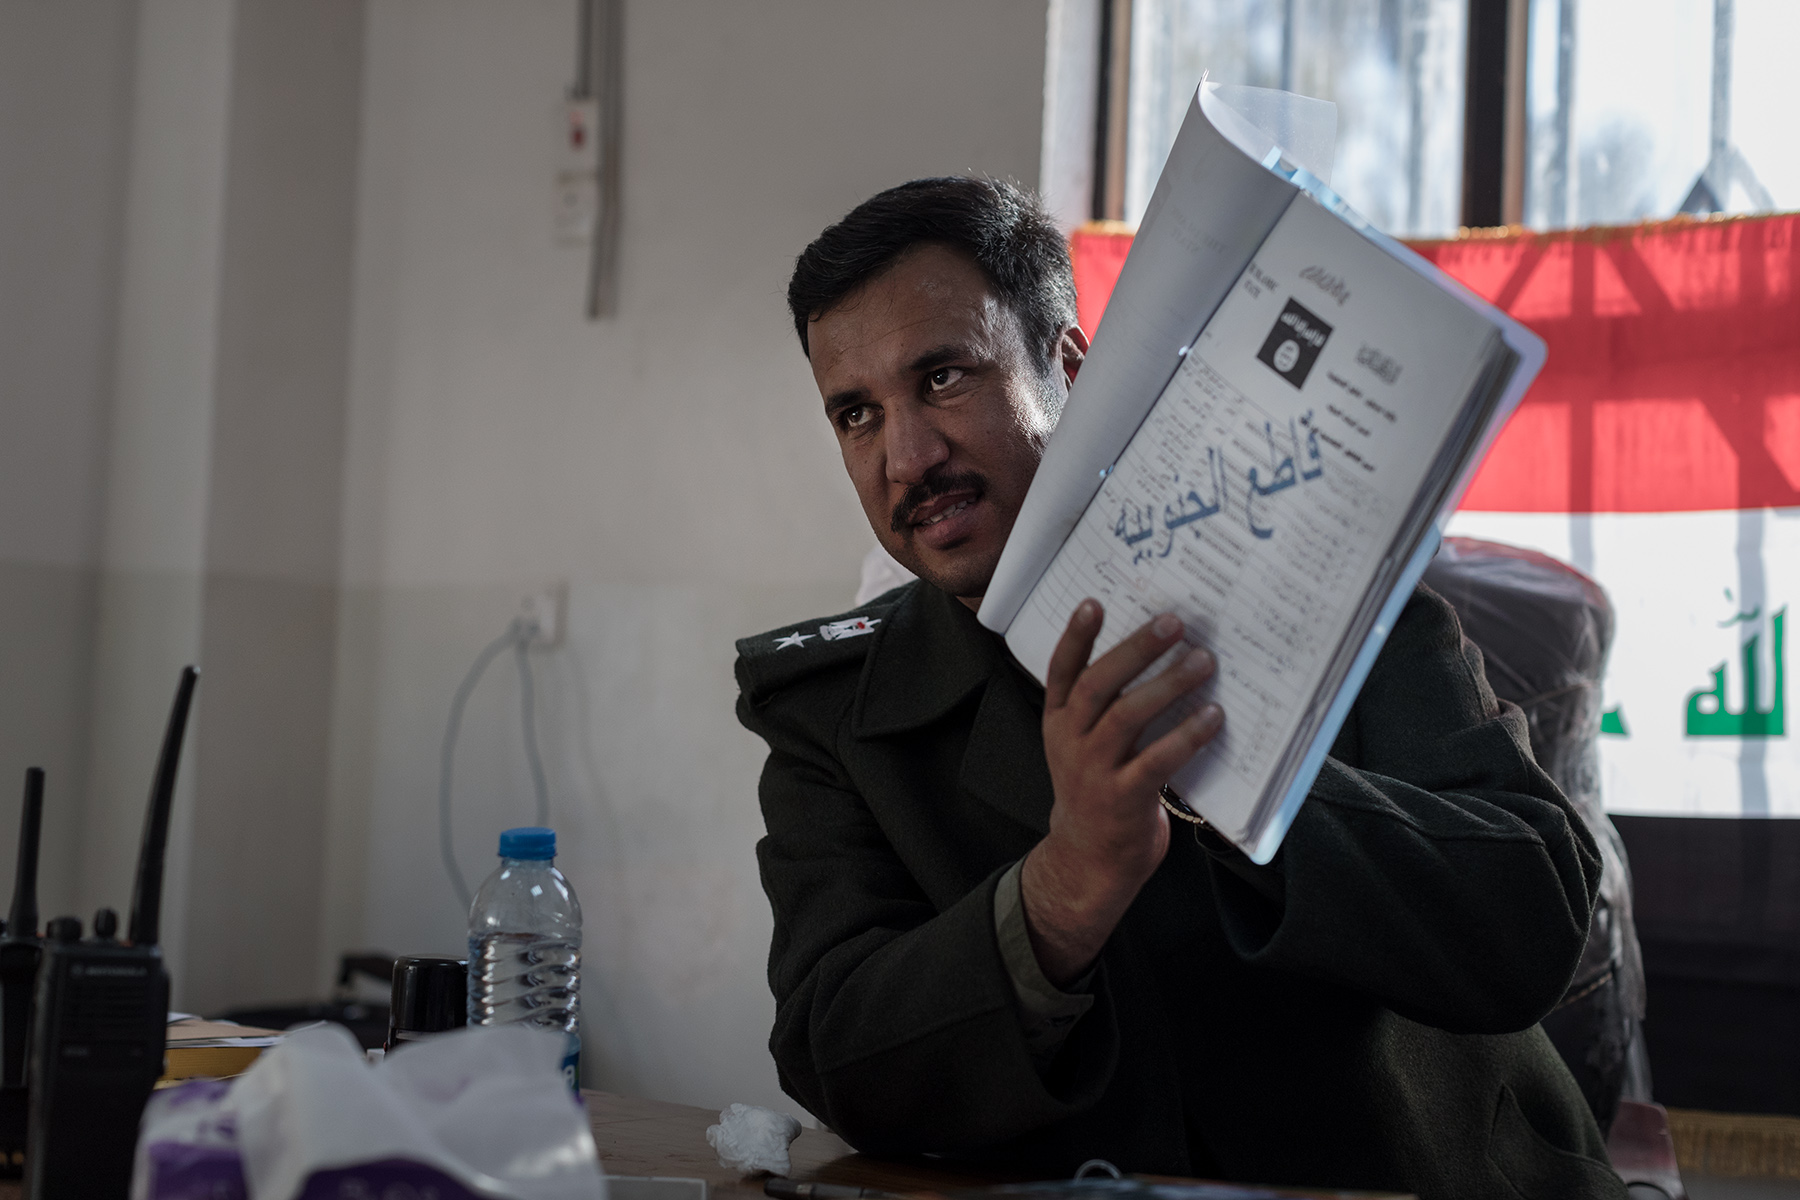 Lieutenant Colonel Yassin Ahmad Abbas, chief of Hammam al-Alil police, seriously injured during an ISIS attack, shows in his office a list with several ISIS members. Hammam al-Alil, Iraq on Jan. 9, 2017. According to him, time of vengeance will come. 